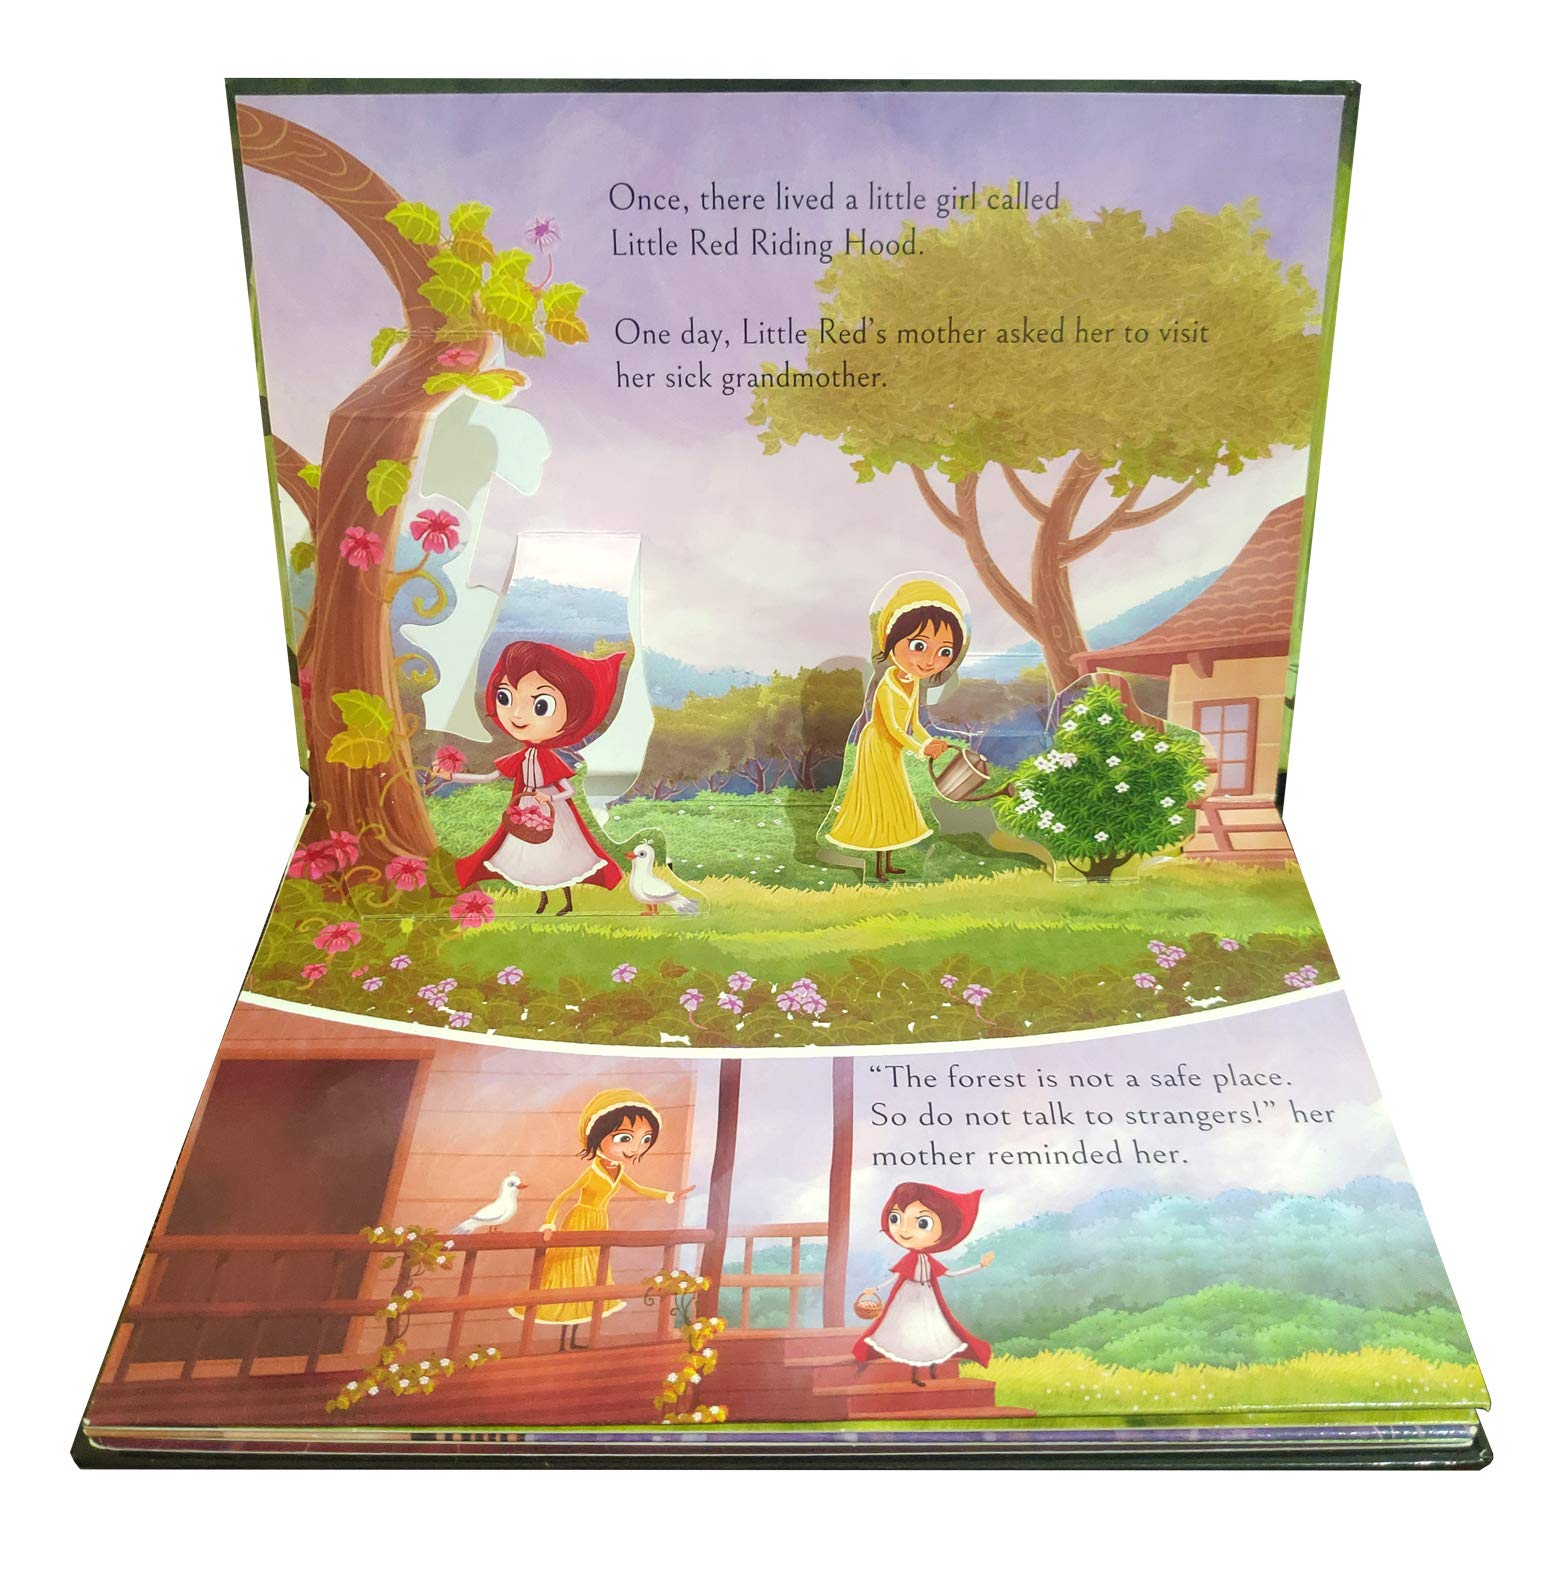 My First Pop Up Fairy Tales - Little Red Riding Hood